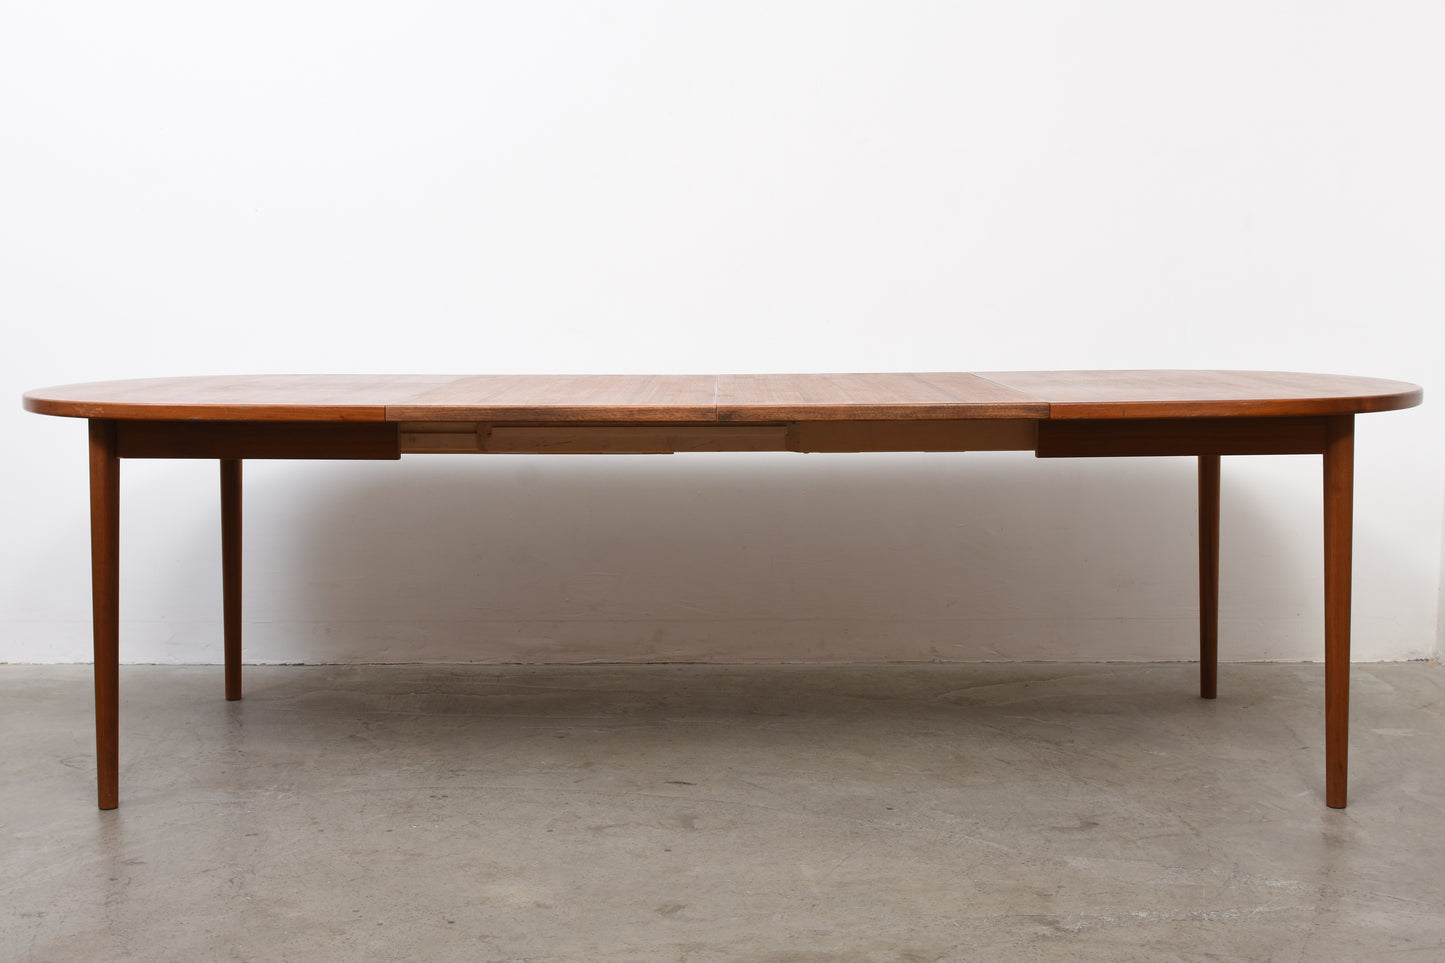 'Ove' dining table by Nils Jonsson